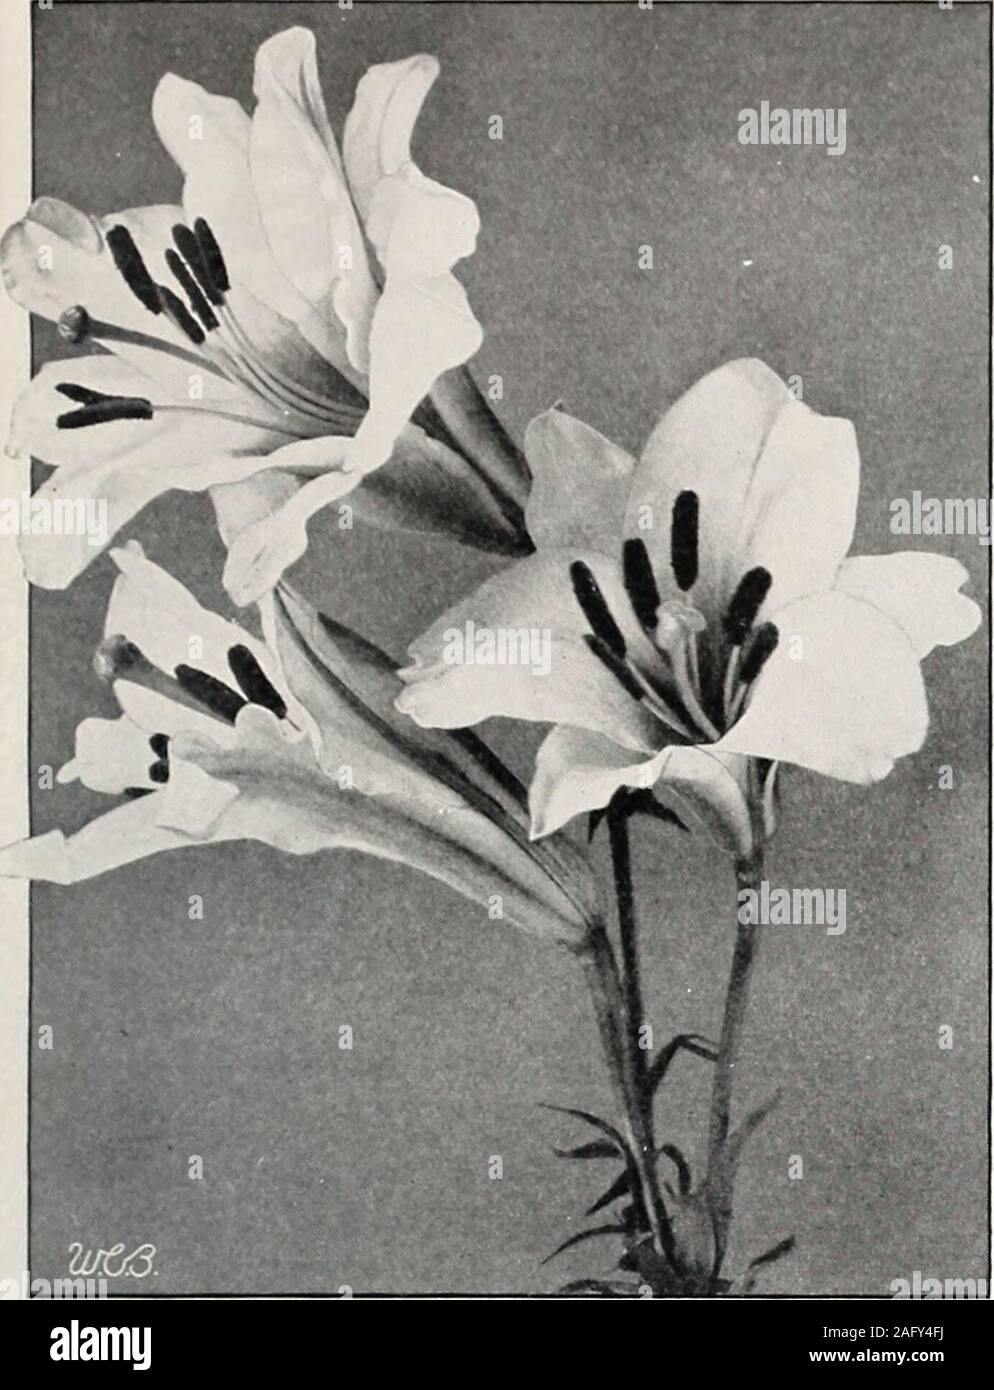 . Beckert's bulbs. ilium candidum *AURATUM (Gold-banded Lily). Ivory-white,with central band of yellow and numerouspurple spots. Each Doz. 100 9-x 11-in. circumference. .$0 40 $4 00 $30 0011- x 13-in., Mammoth Bulbs 50 5 00 40 00 *A U R A T U M PICTUM. Grand pure white, spot-ted crimson, without theyellow band.9- x 10-in. circumference. . 85 8 50 *AURATUM PLATYPHYLLUM (macran-thum). A giant Lily. Similar in color toAuratum, but much larger and with fewer spots. Each Doz. 1009-x 10-in. circumference. $0 65 $6 50 $50 00 *SPECIOSUM ALBUM. Pure white, with greenband in the center of each petal; ex Stock Photo